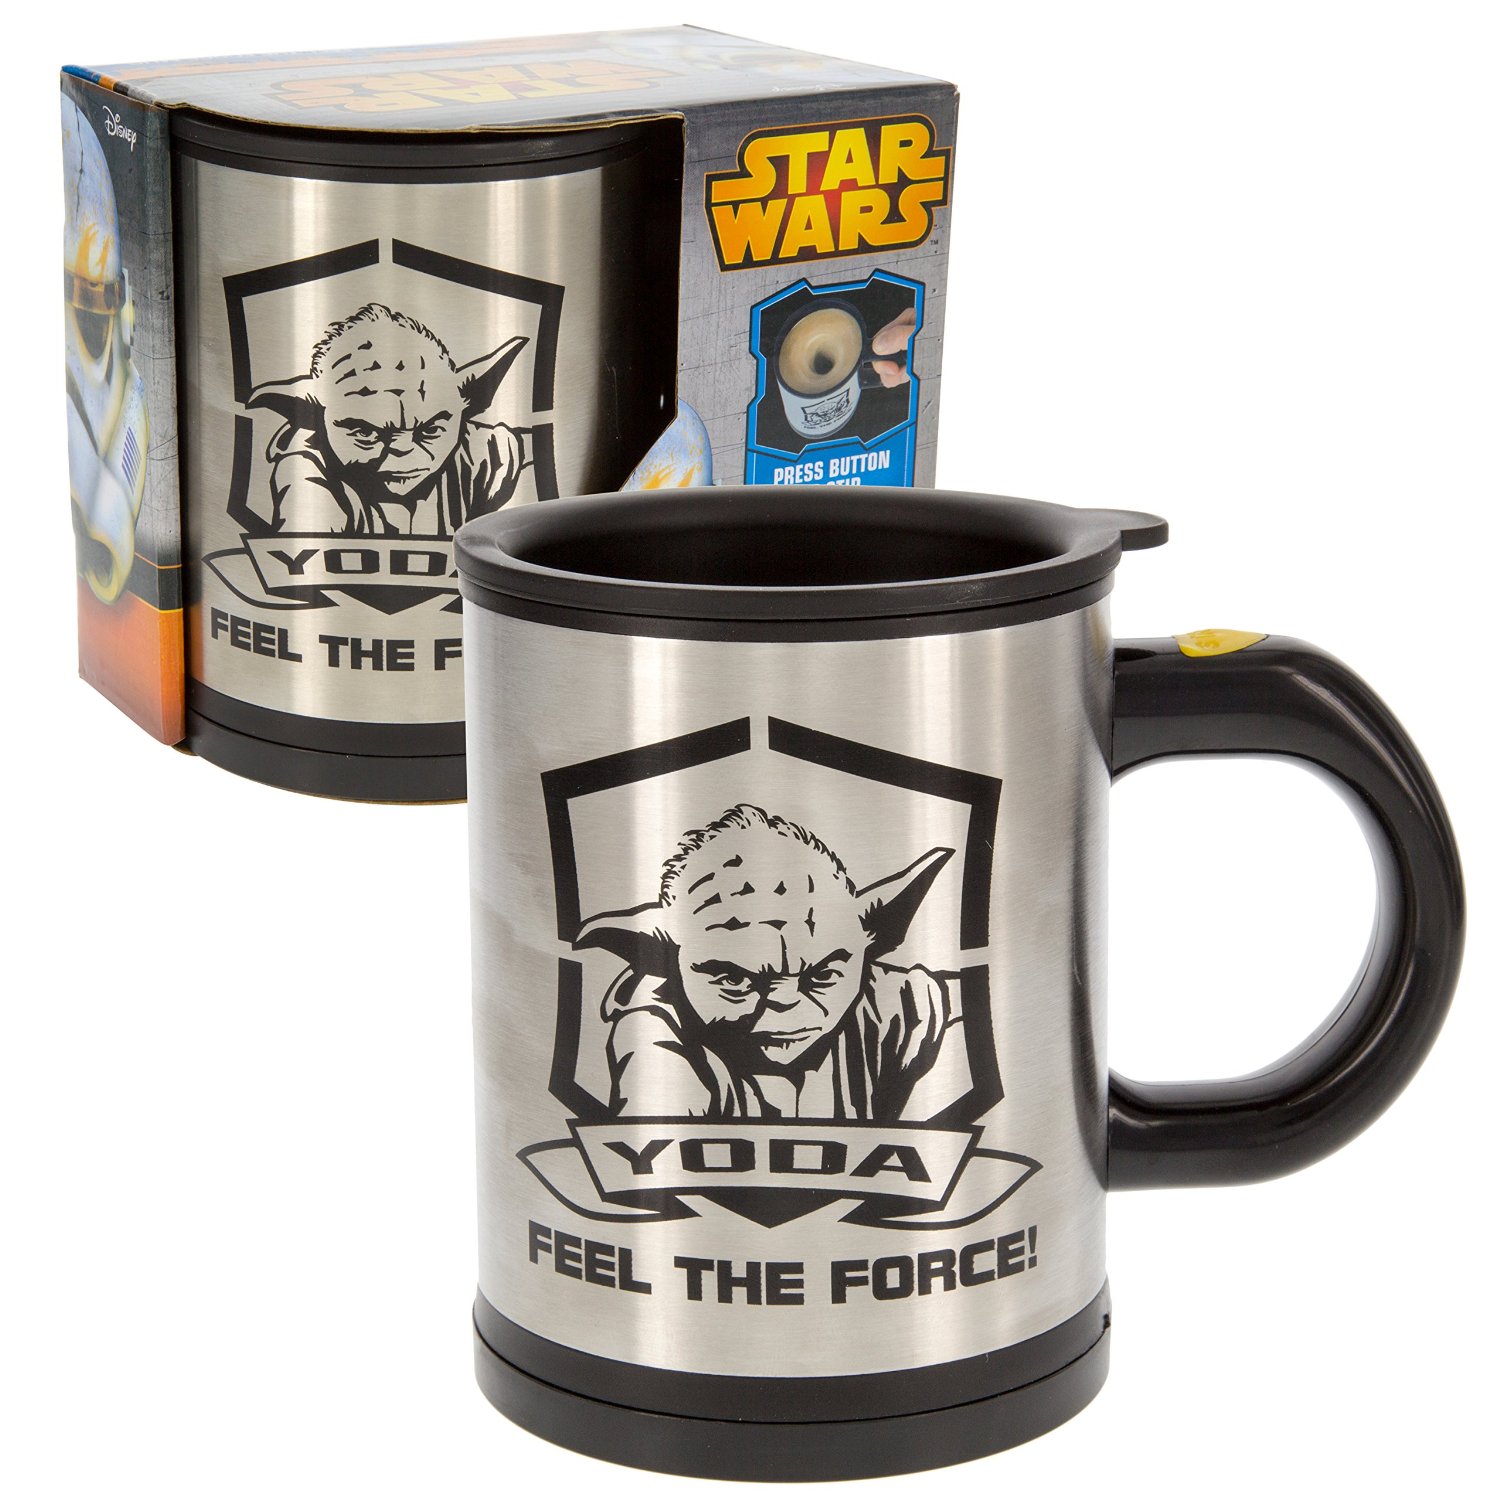 Star Wars Gift Guide For The Home 3